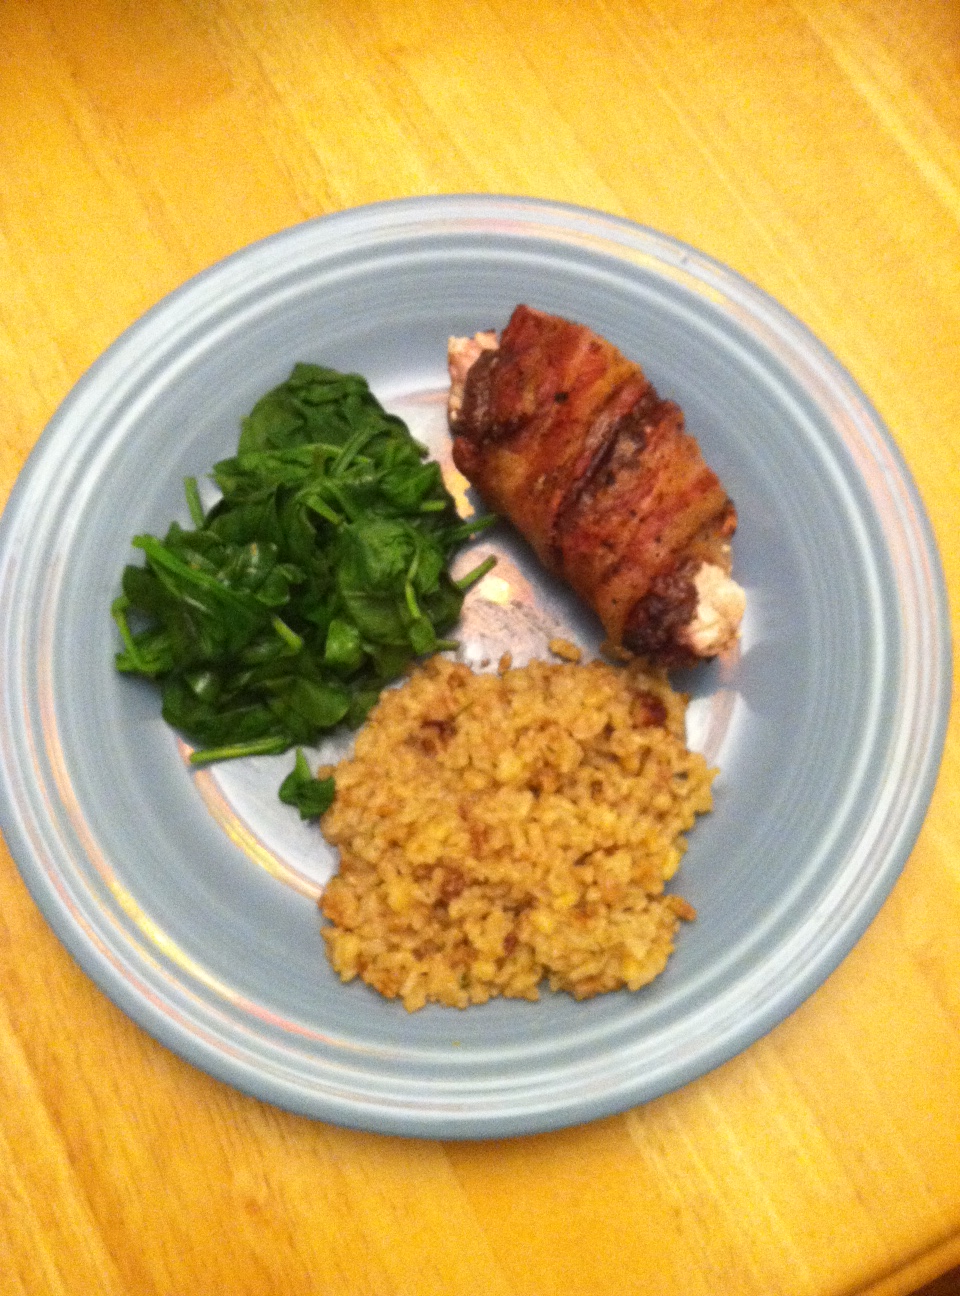 Bacon Wrapped Grilled Duck-One of our family's favorites!